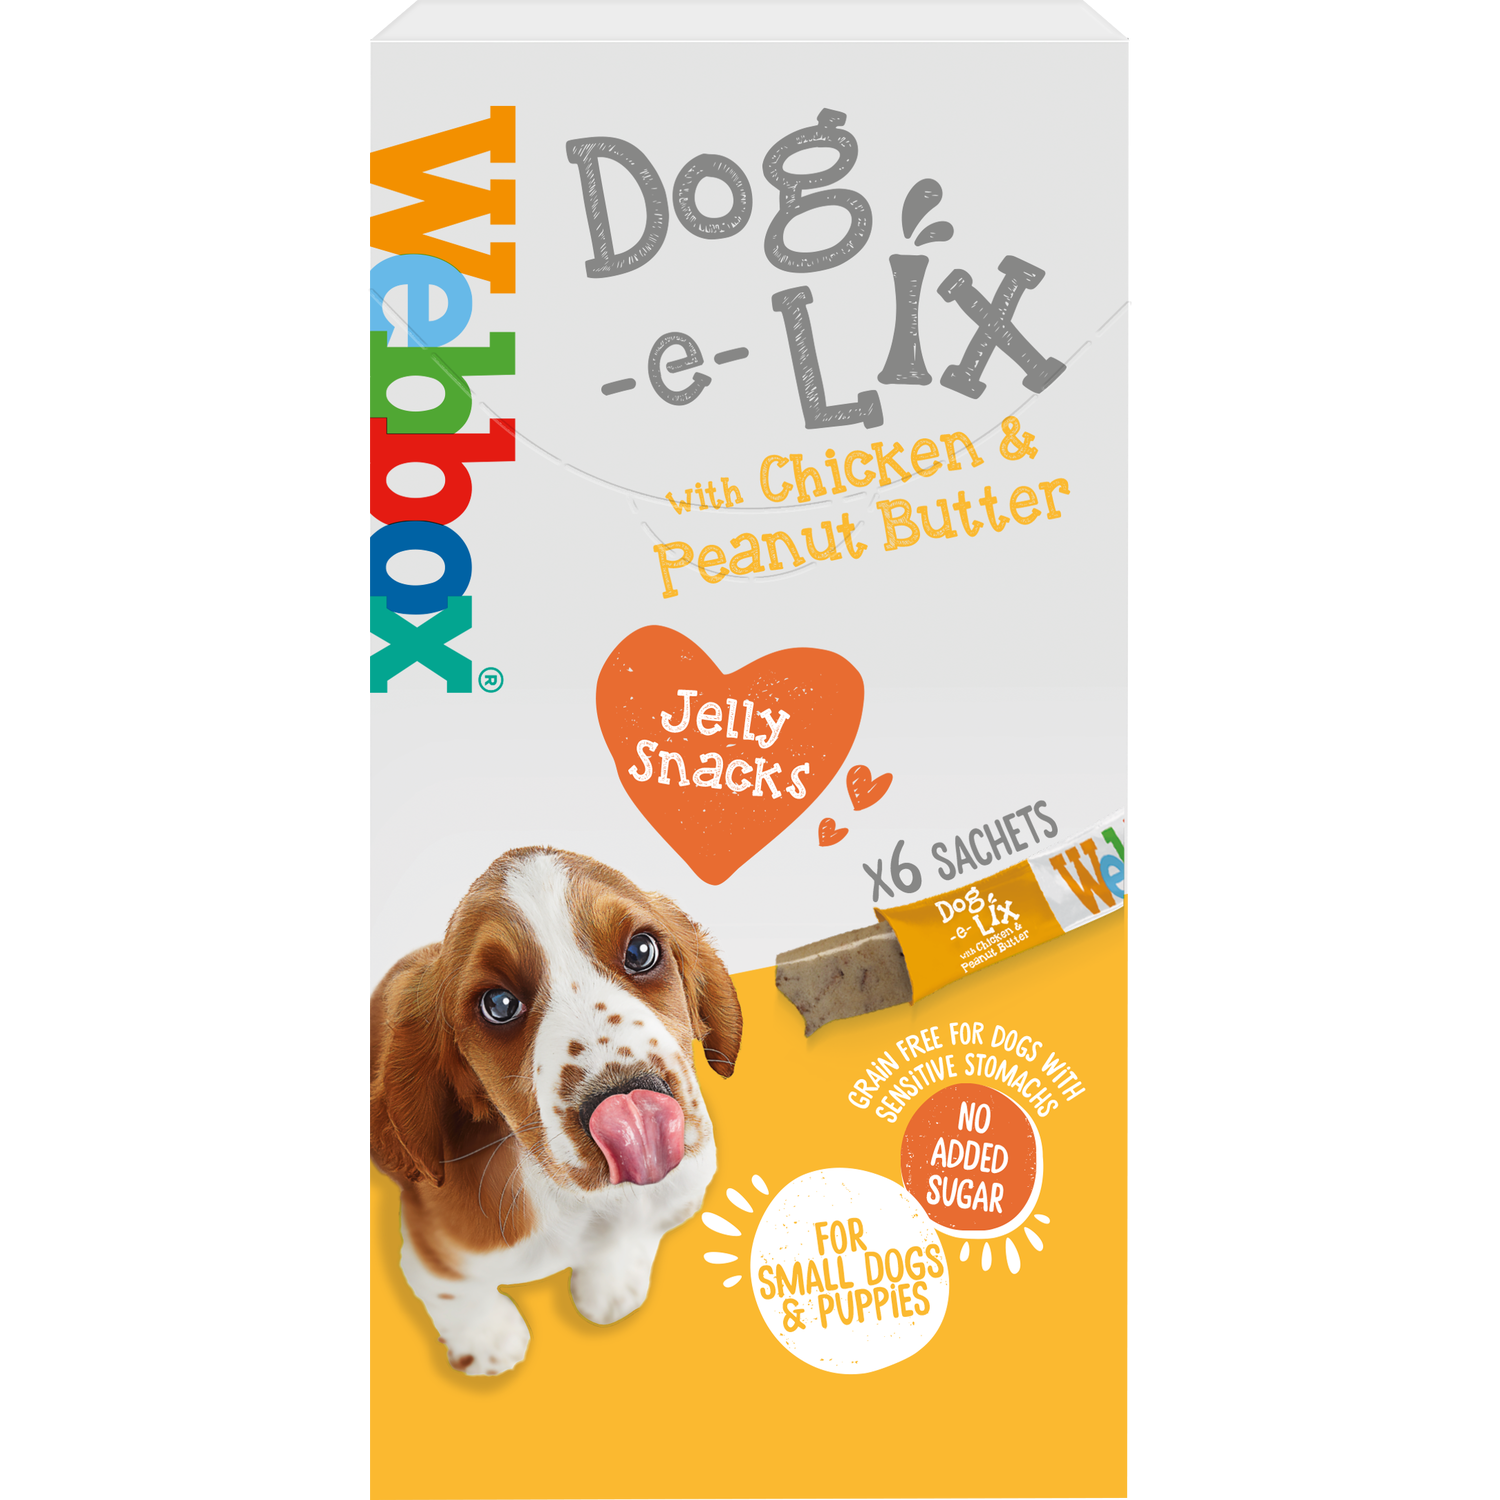 Webbox Dog-e-Lix Chicken and Peanut Butter Jelly Dog Treat 100g 6 Pack Image